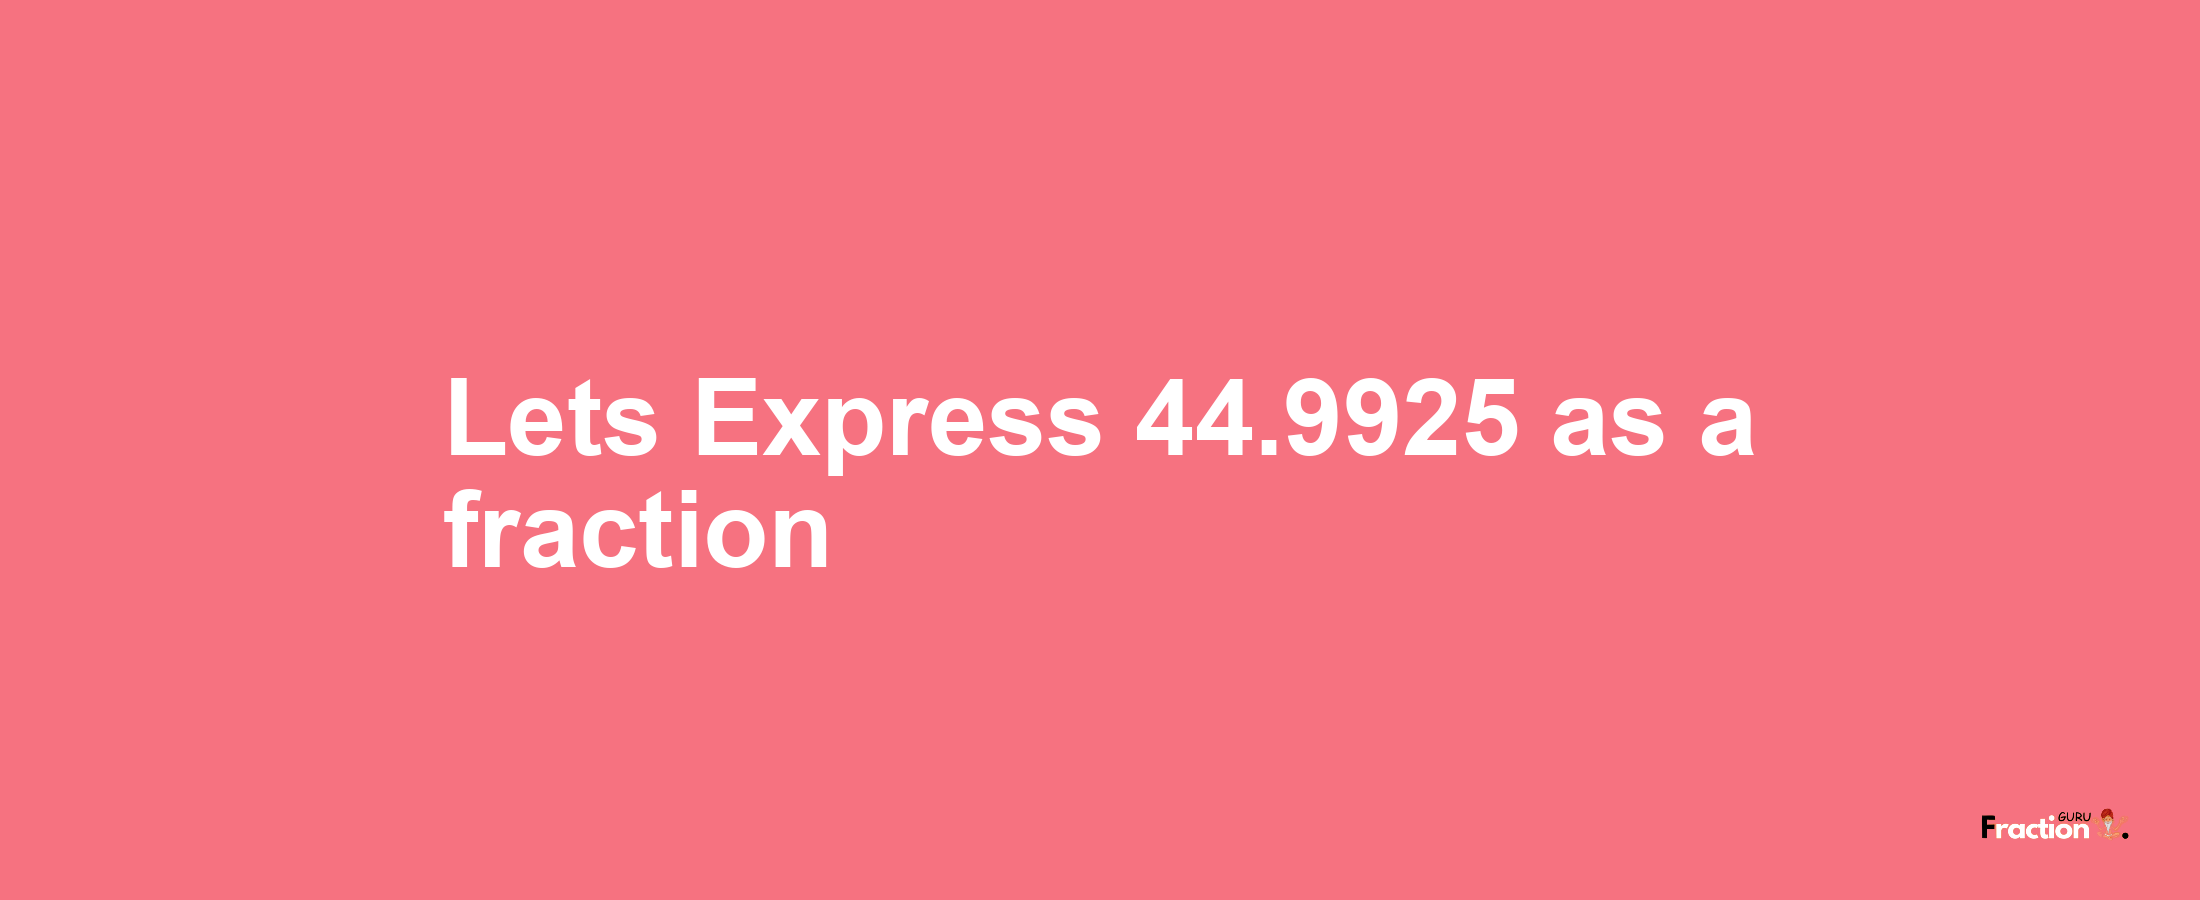 Lets Express 44.9925 as afraction